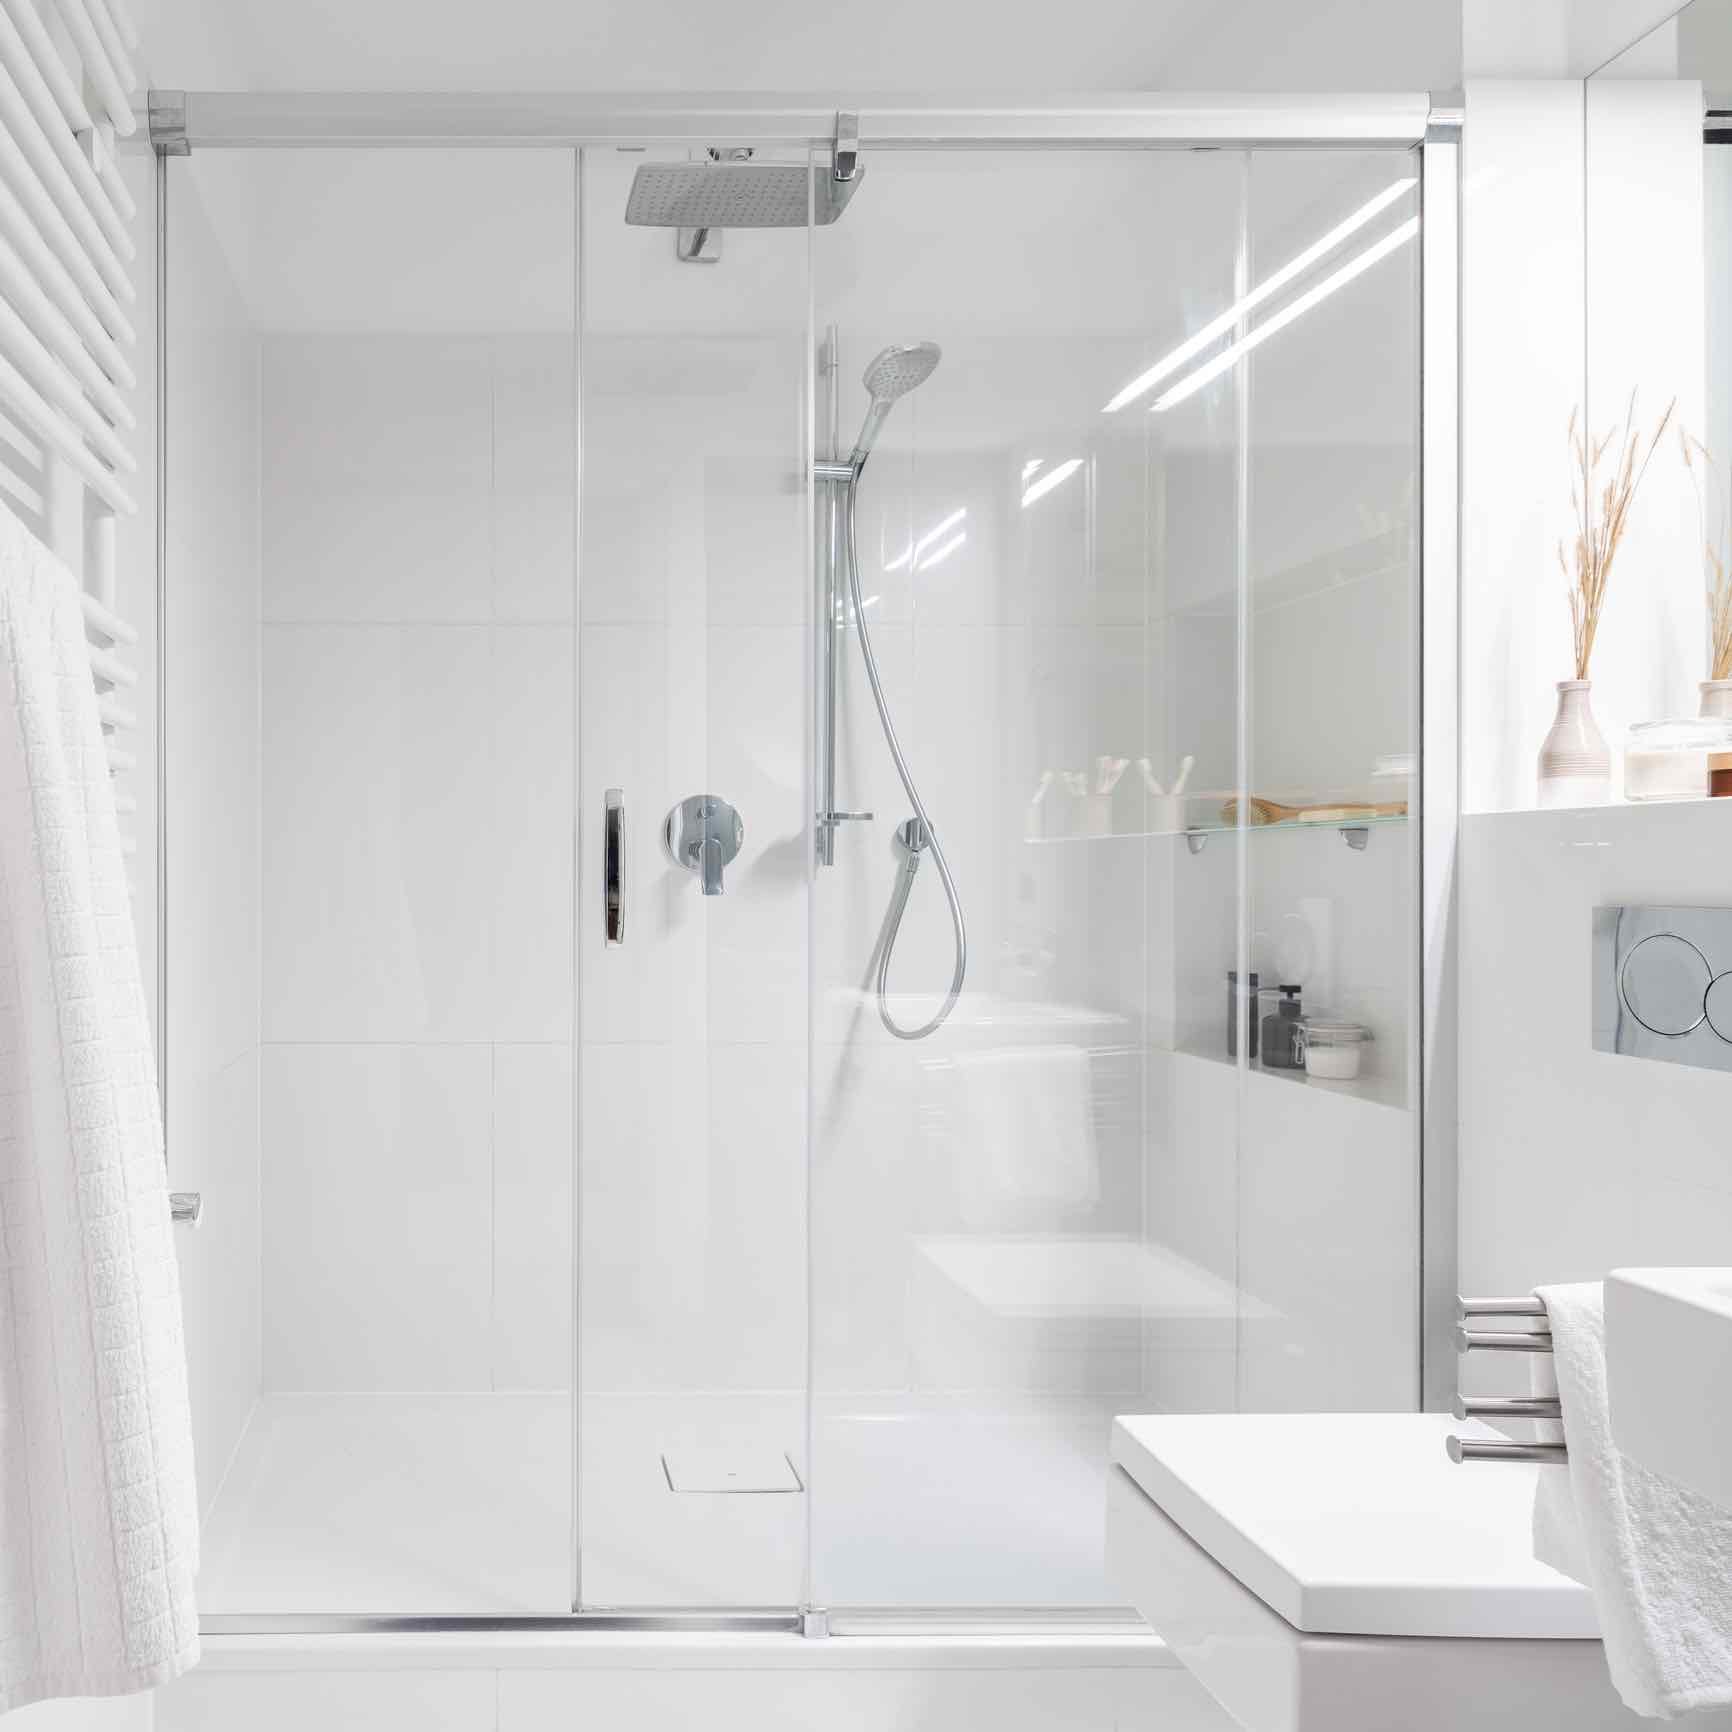 What Shower Material is Easiest to Clean?